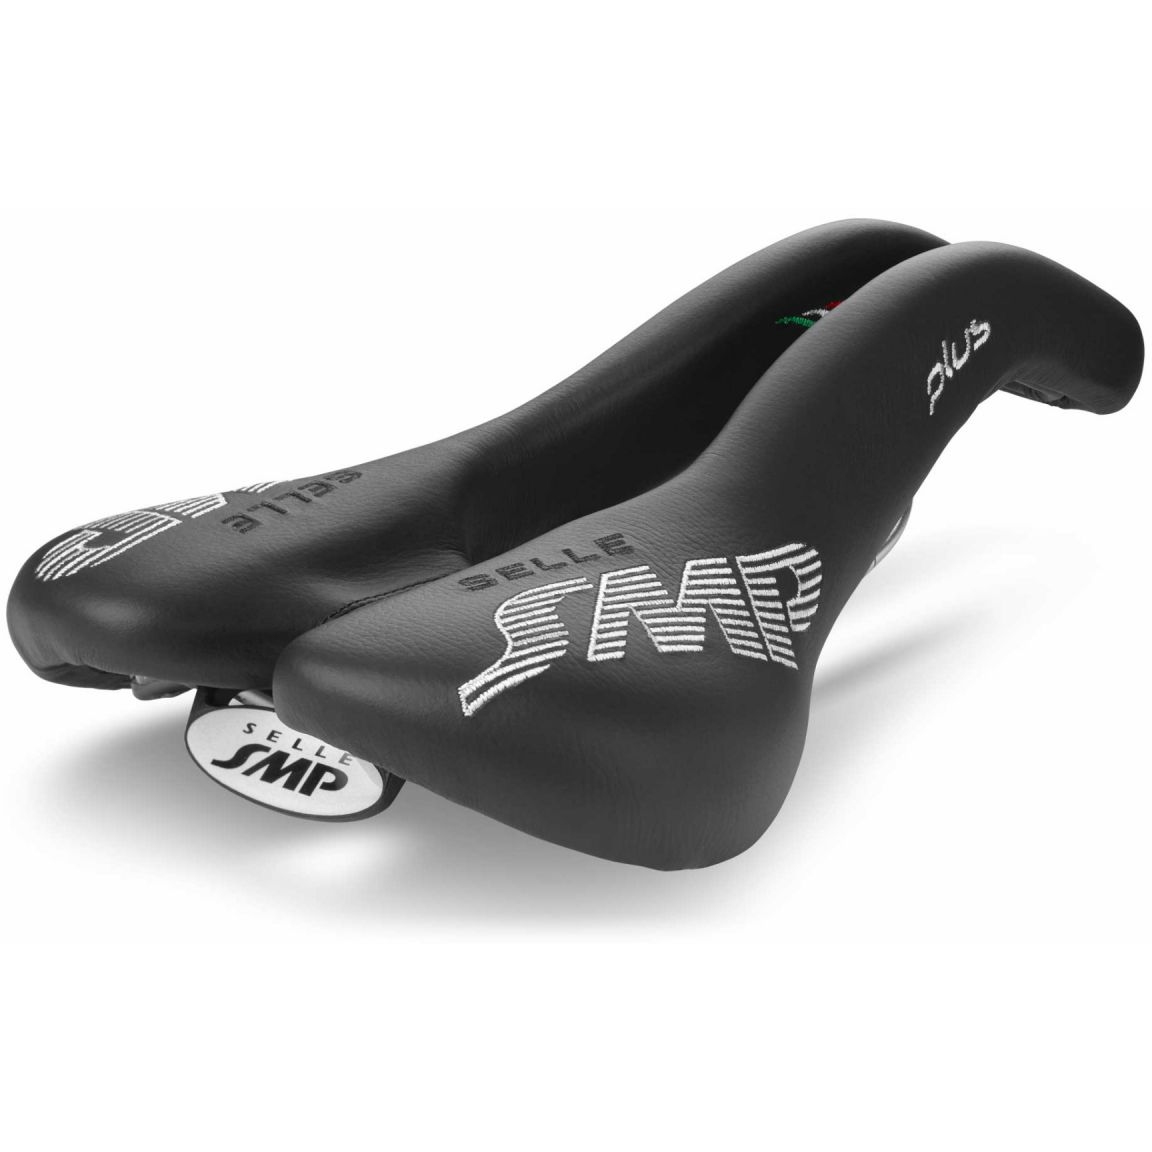 Picture of Selle SMP Plus Saddle - black